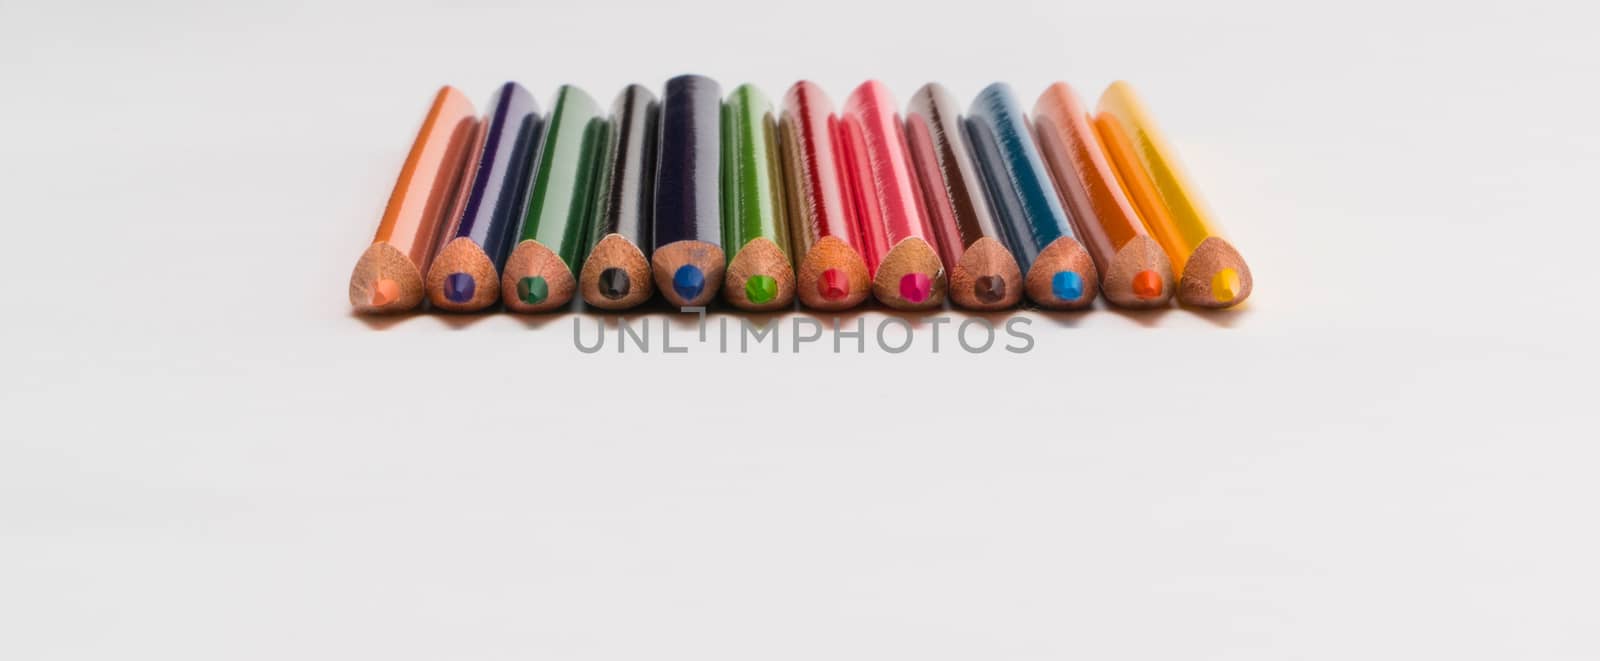 set of colored pencils on a white background, isolated. back to school